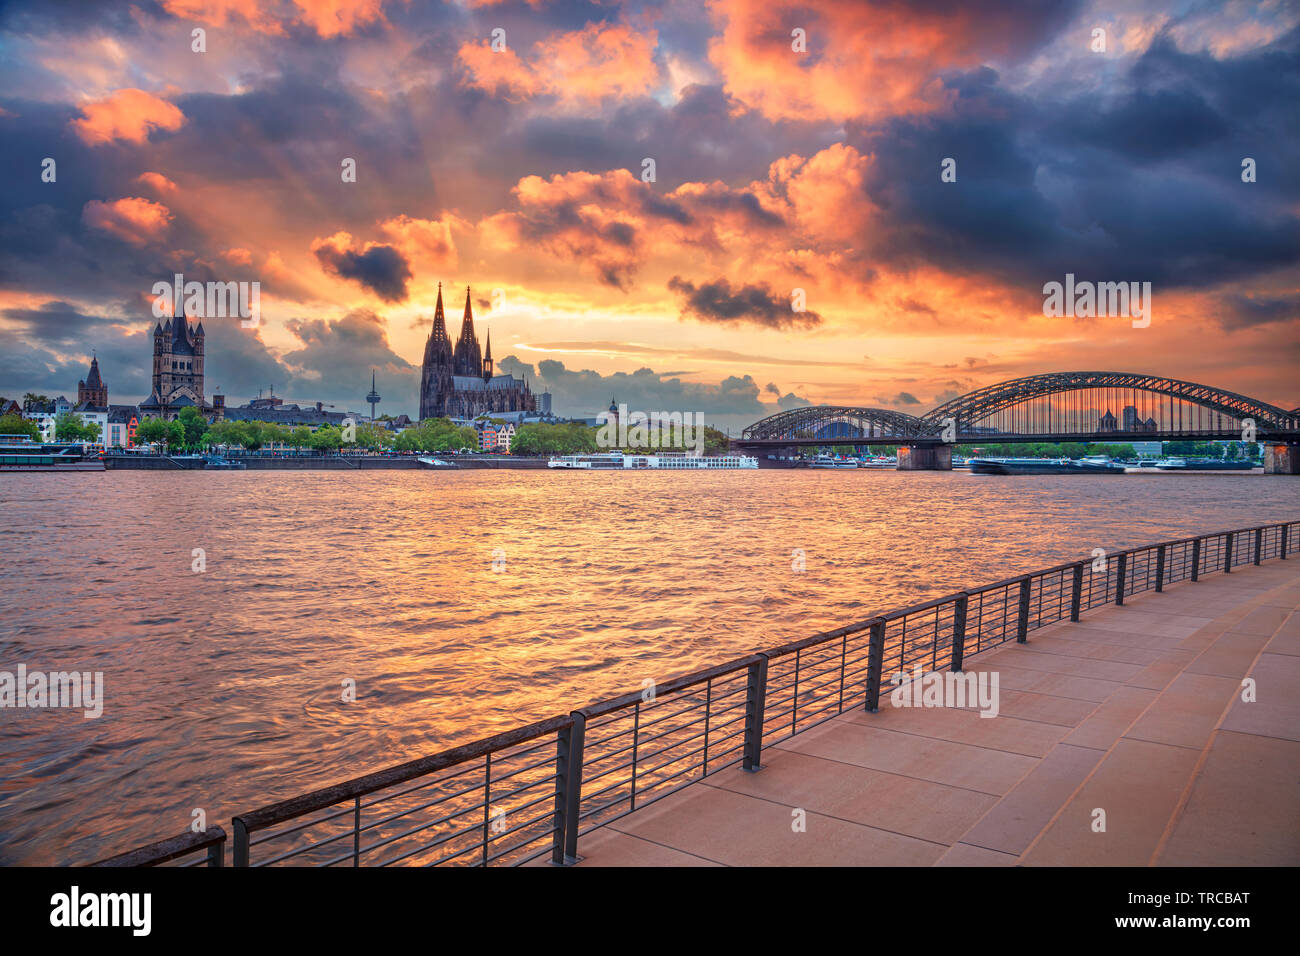 Cologne, Germany. Cityscape image of Cologne, Germany with Cologne Cathedral and Hohenzollern Bridge during dramatic sunset. Stock Photo